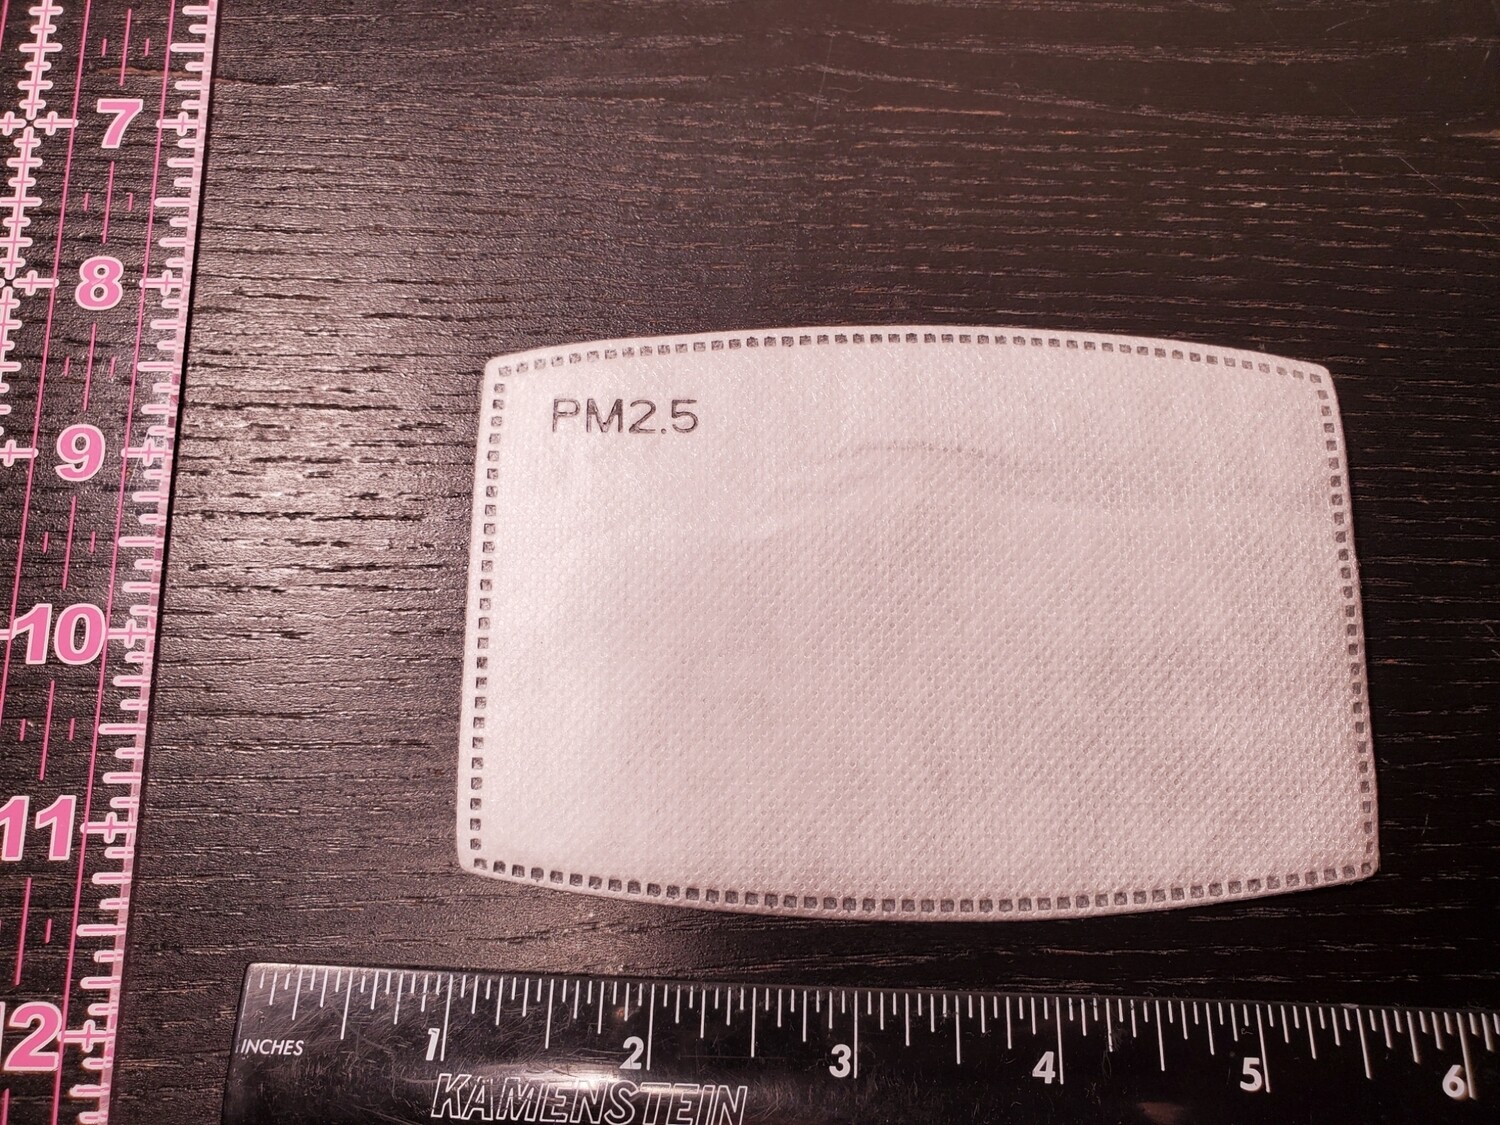 PM2.5 filter